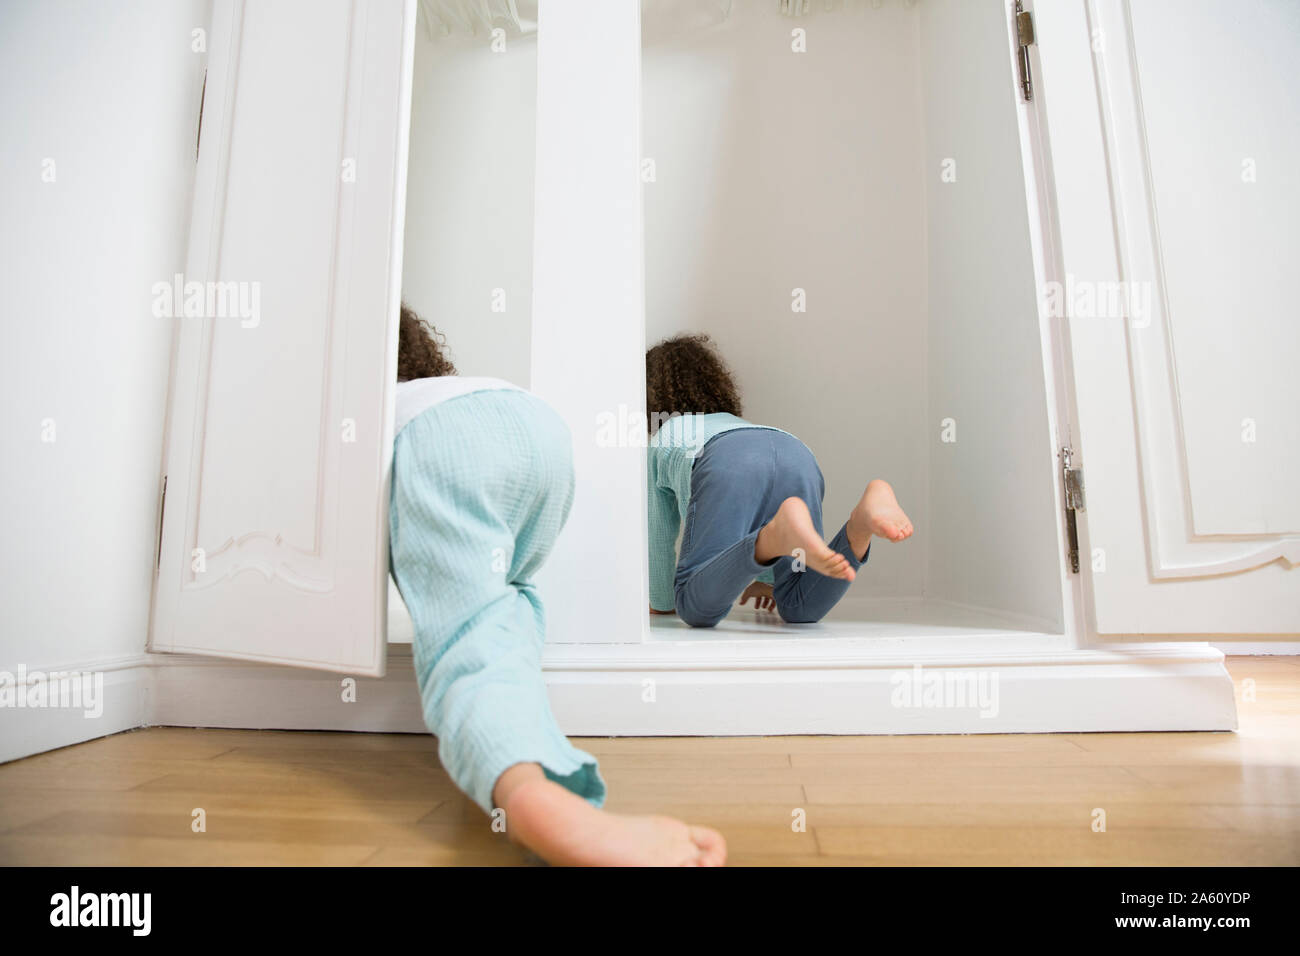 Two twin brothers crawling into wardrobe at home Stock Photo